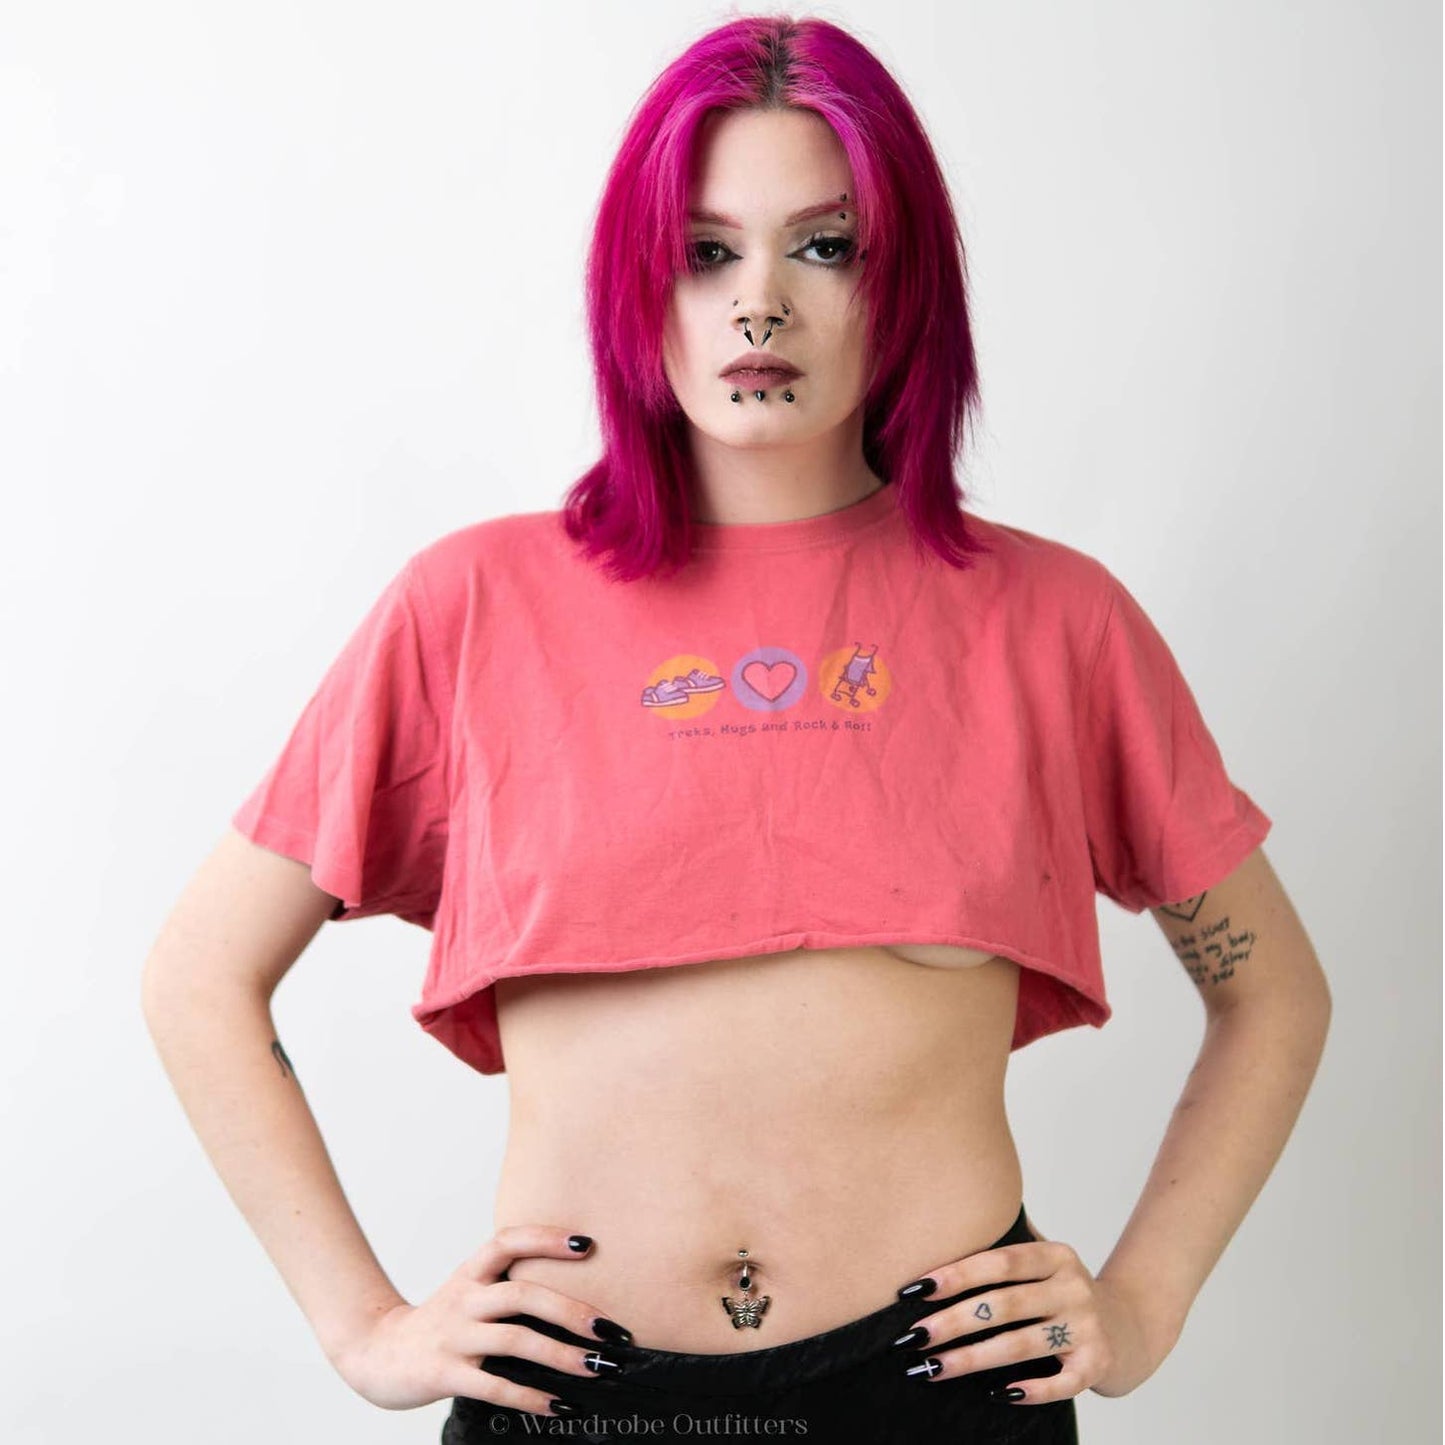 Life is Good Cropped Pink "Treks, Hugs and Rock & Roll" Tee